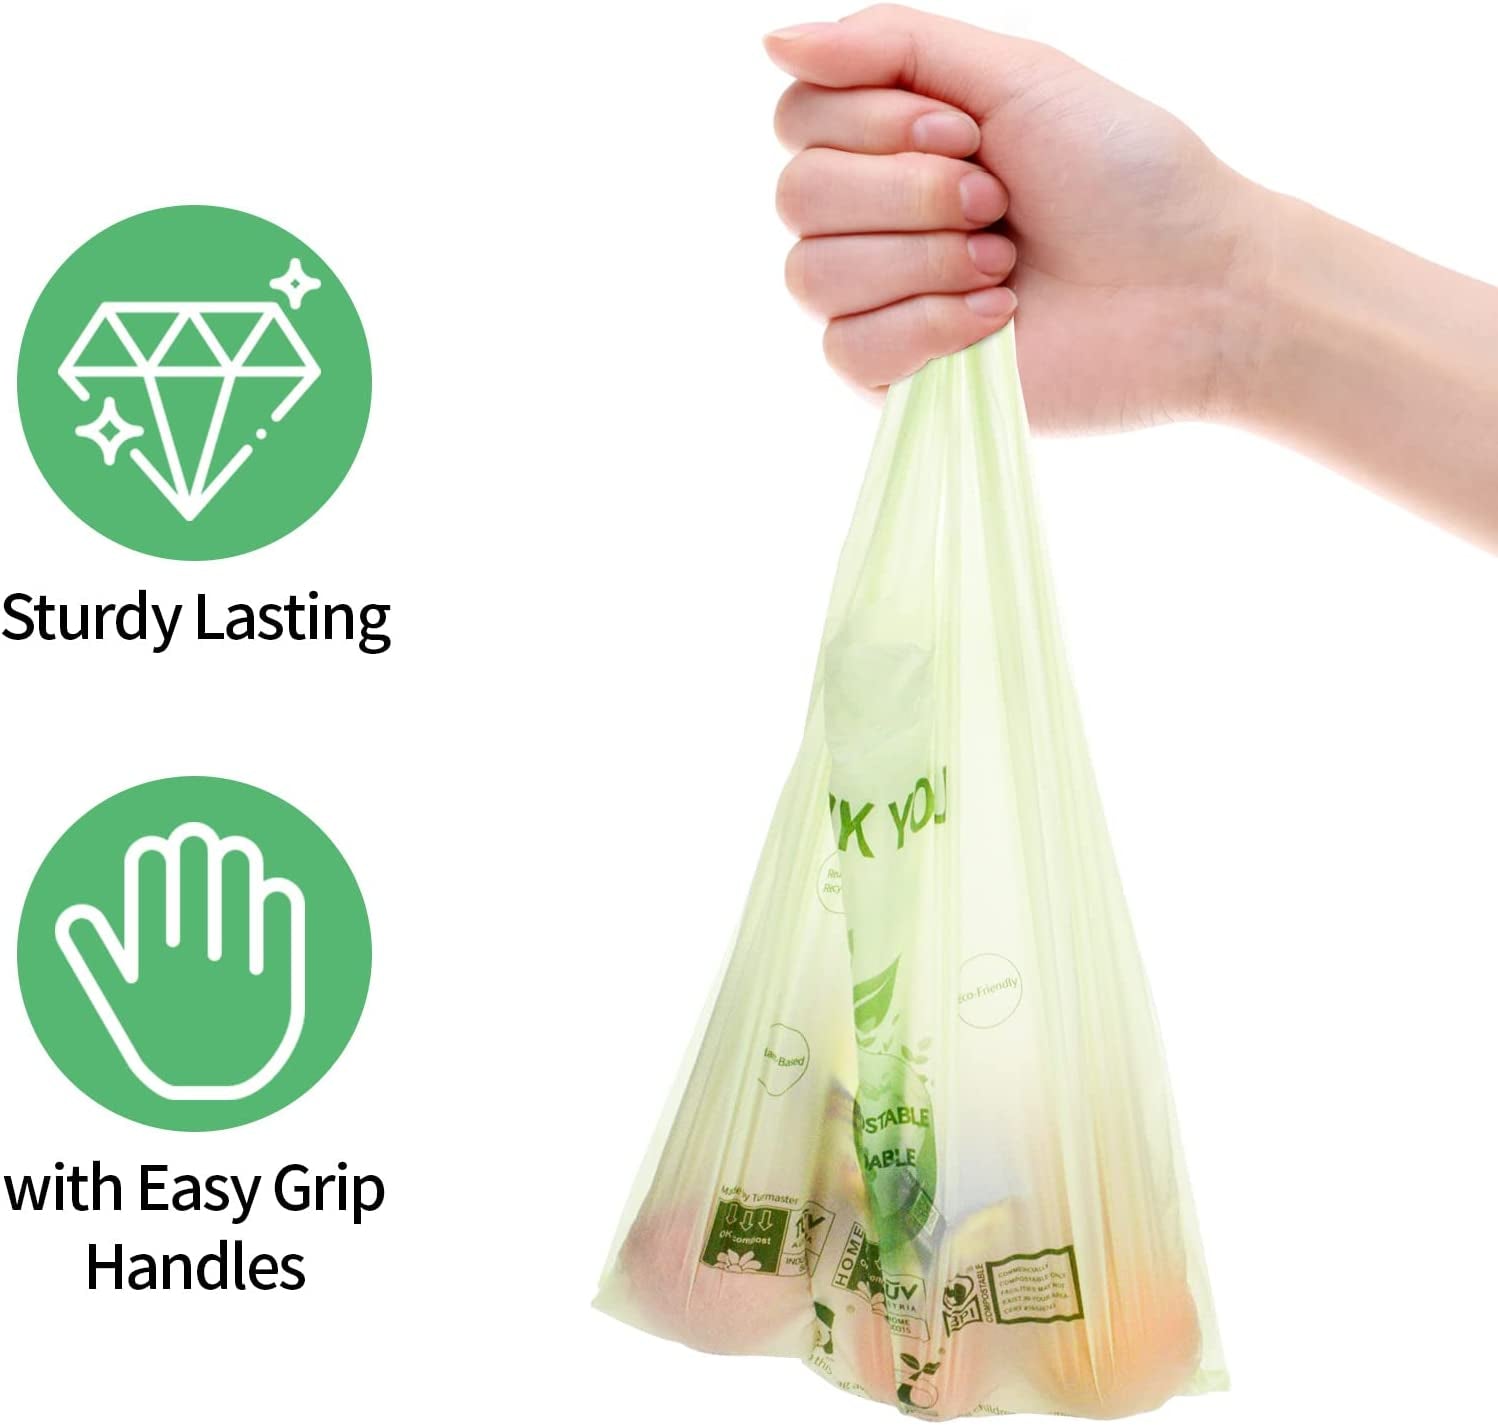 100% Certified Compostable Grocery Bags Biodegradable T-Shirt Bags Recyclable Thank You Shopping Bags Eco Friendly Takeout Reusable Bags, Great for on the Go, Farmers Markets, Grocery Stores, Restaurants 100 Count